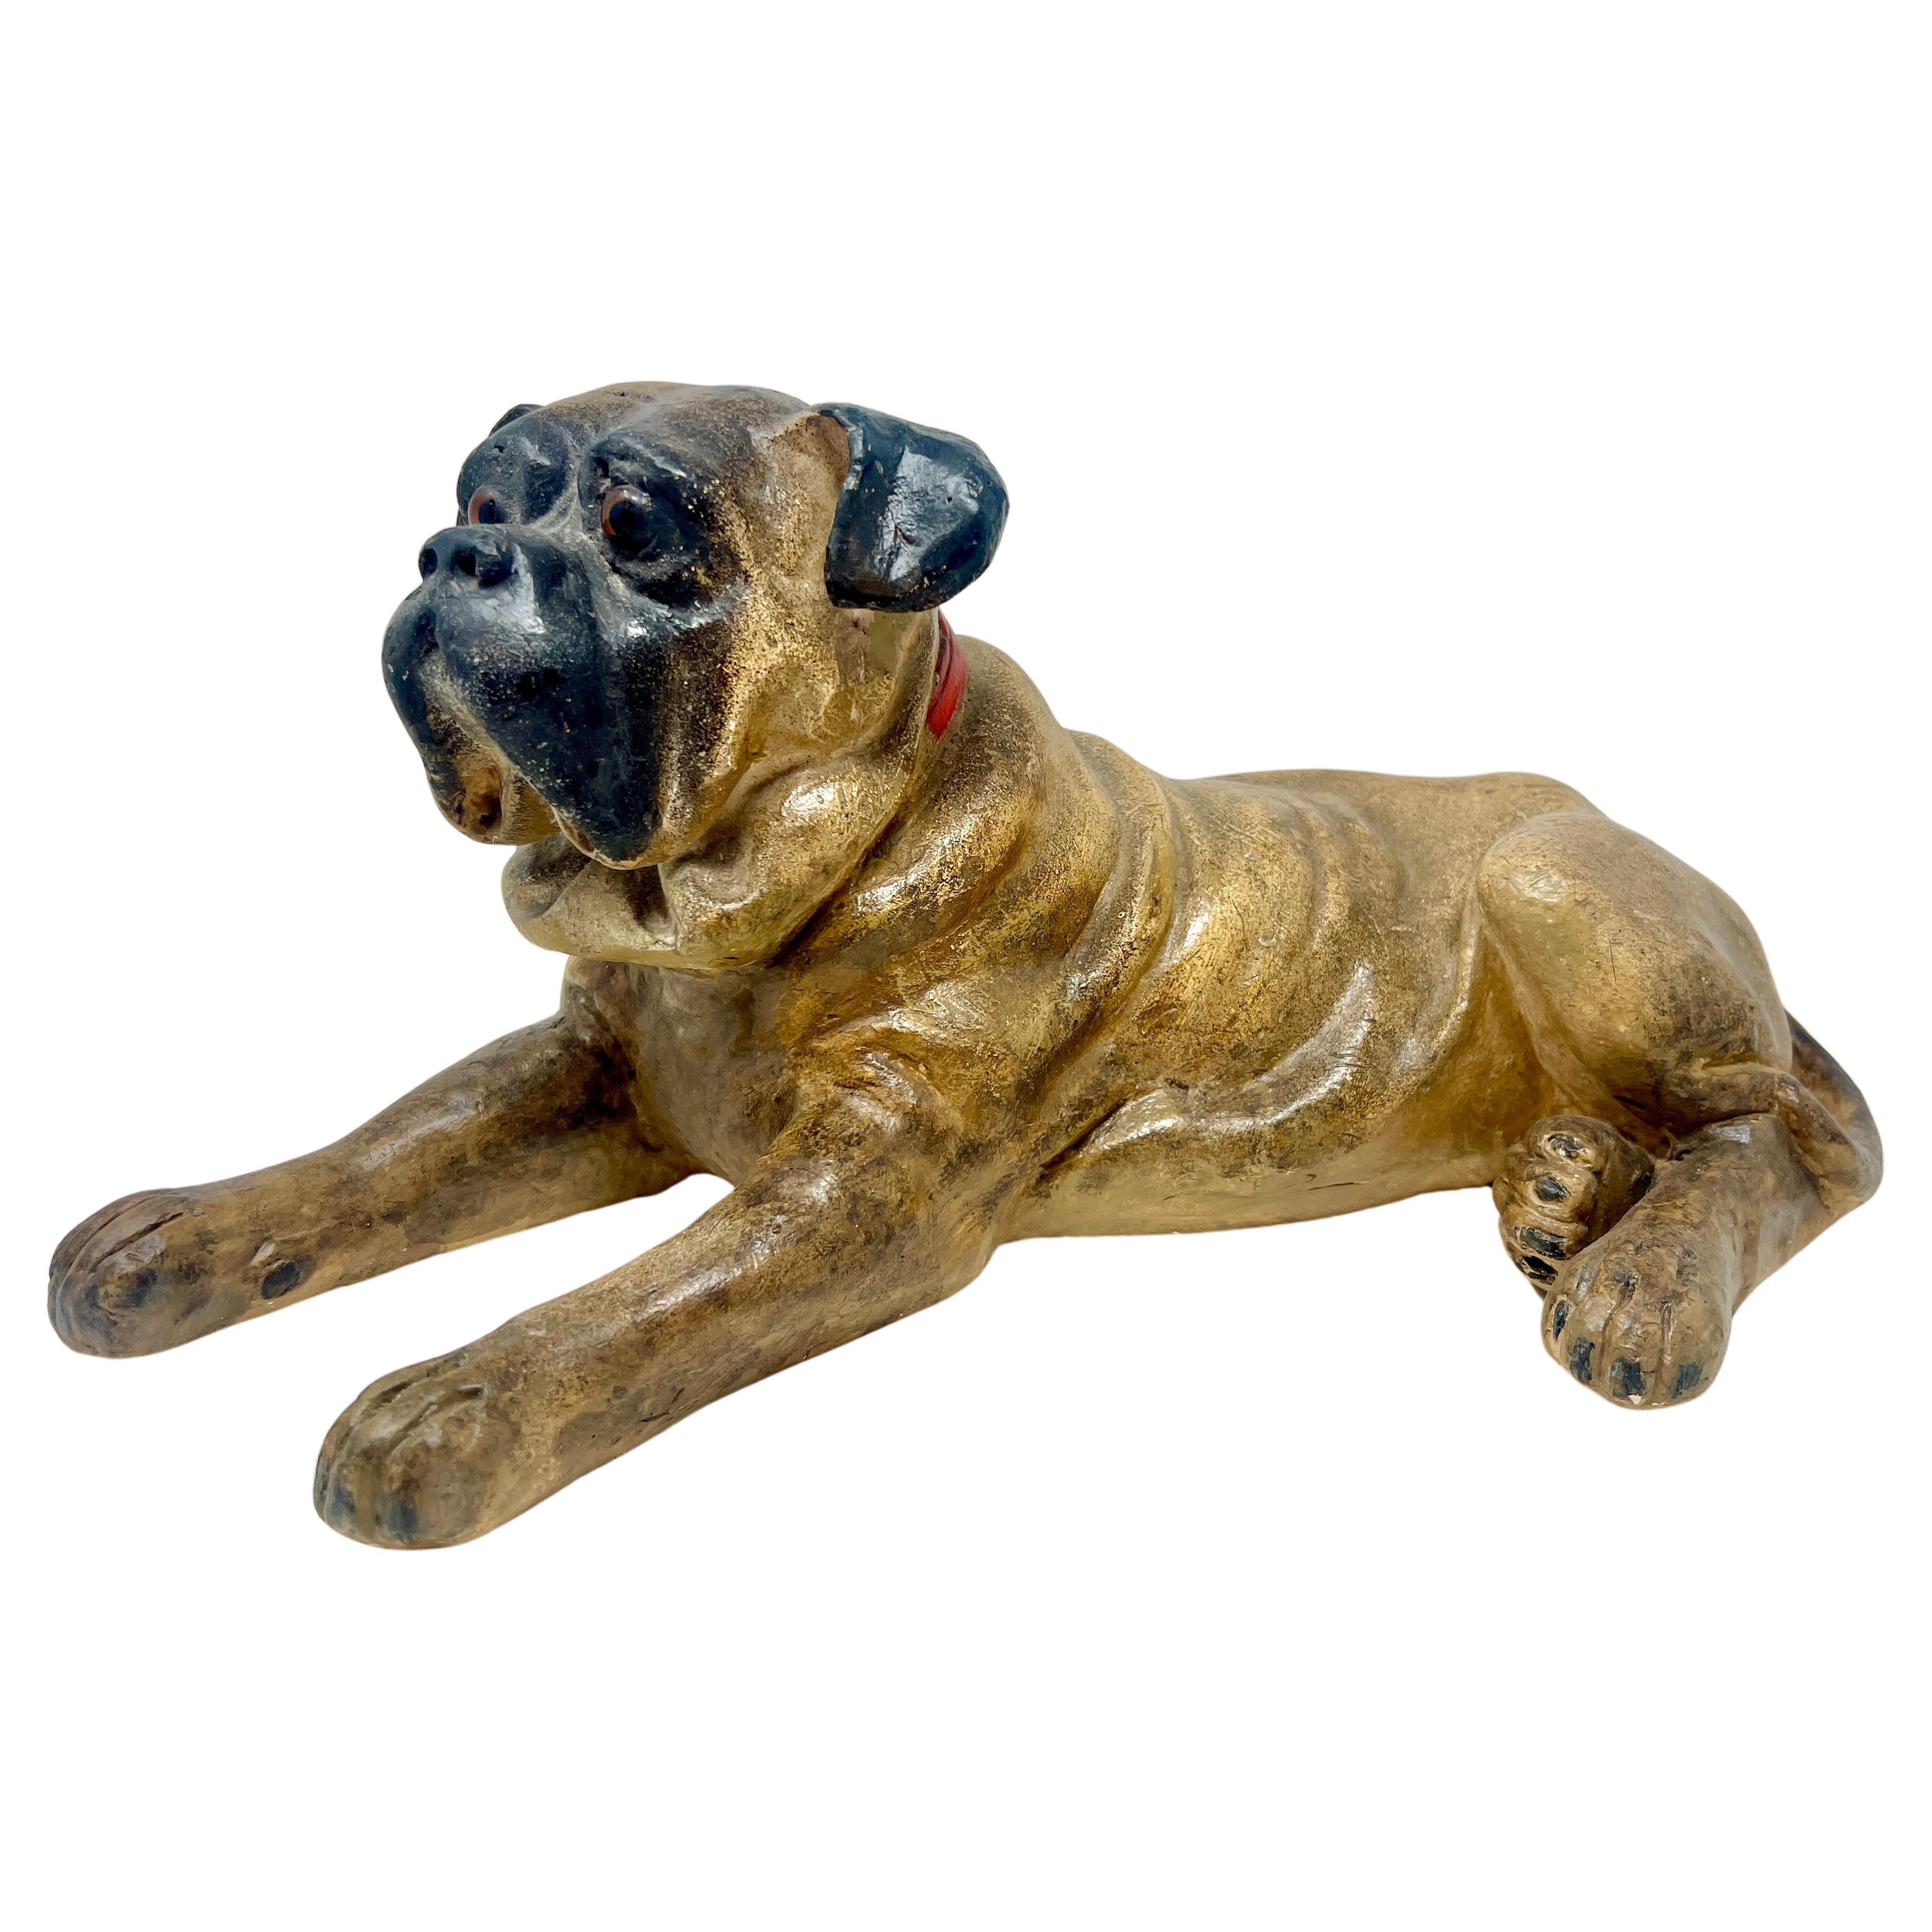 Antique Carved Plaster Dog with Glass Eyes, Circa 1910.
